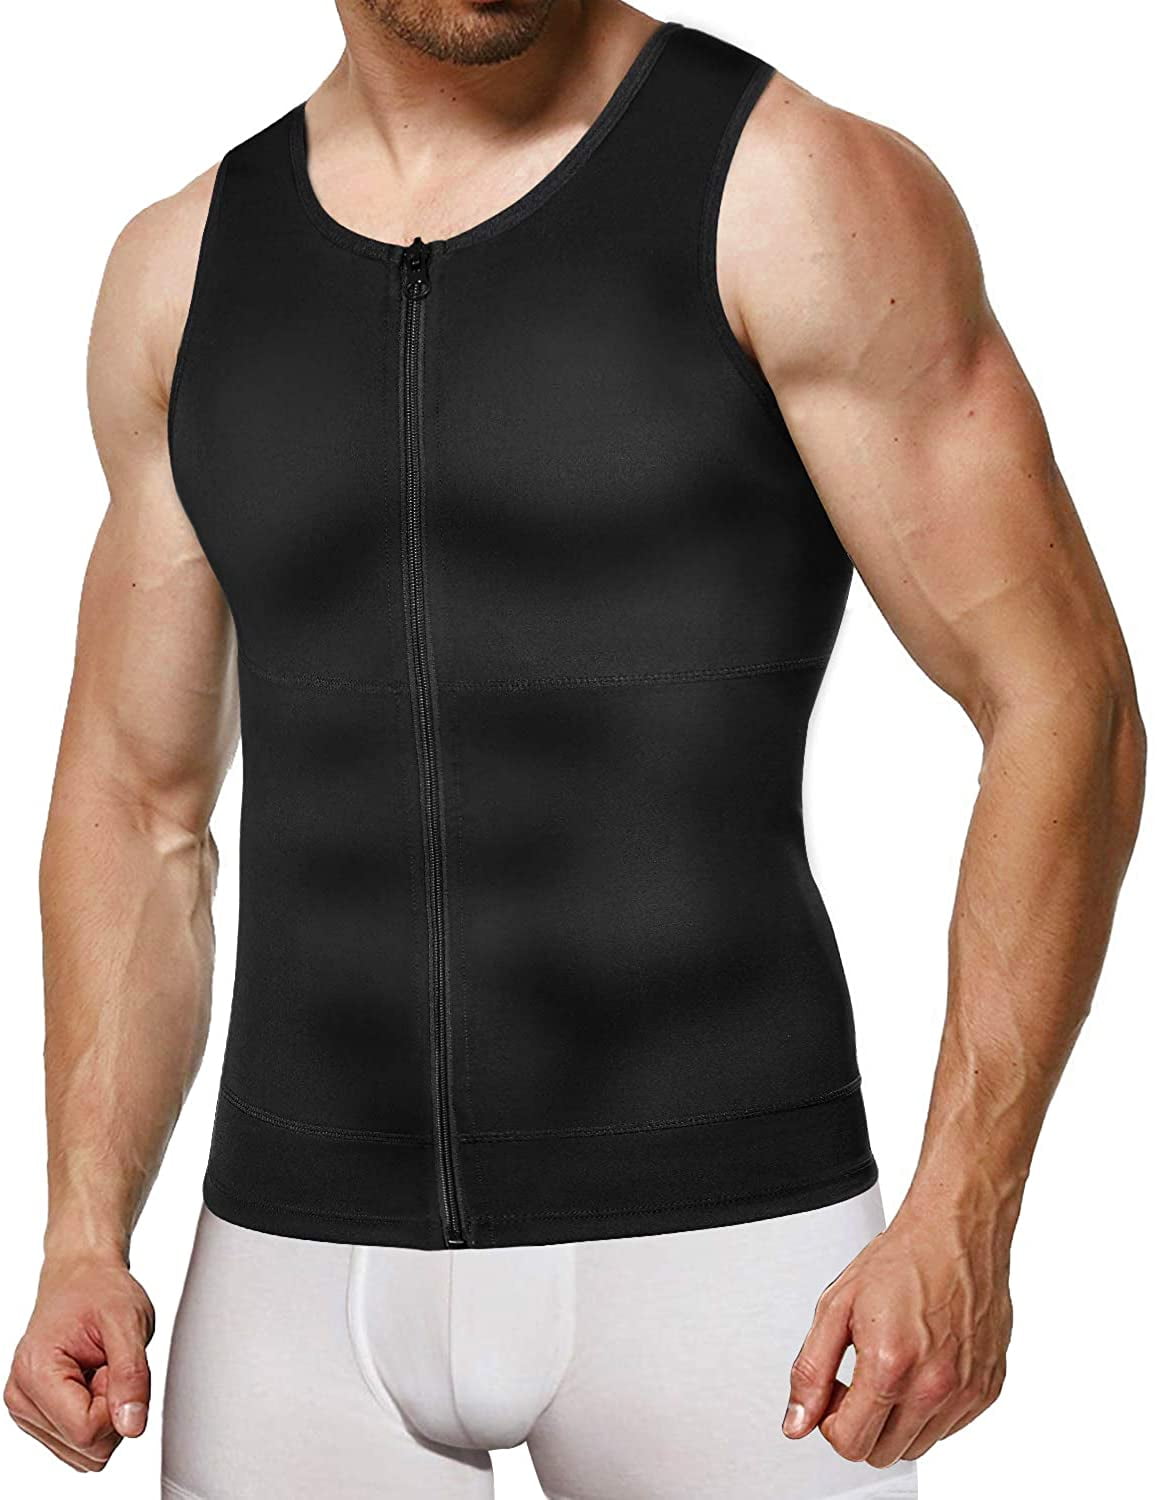 Eleady Men's Compression Shirt Undershirt Slimming Body Shaper Athletic Workout Shirts Tank Top Sport Vest with Zipper